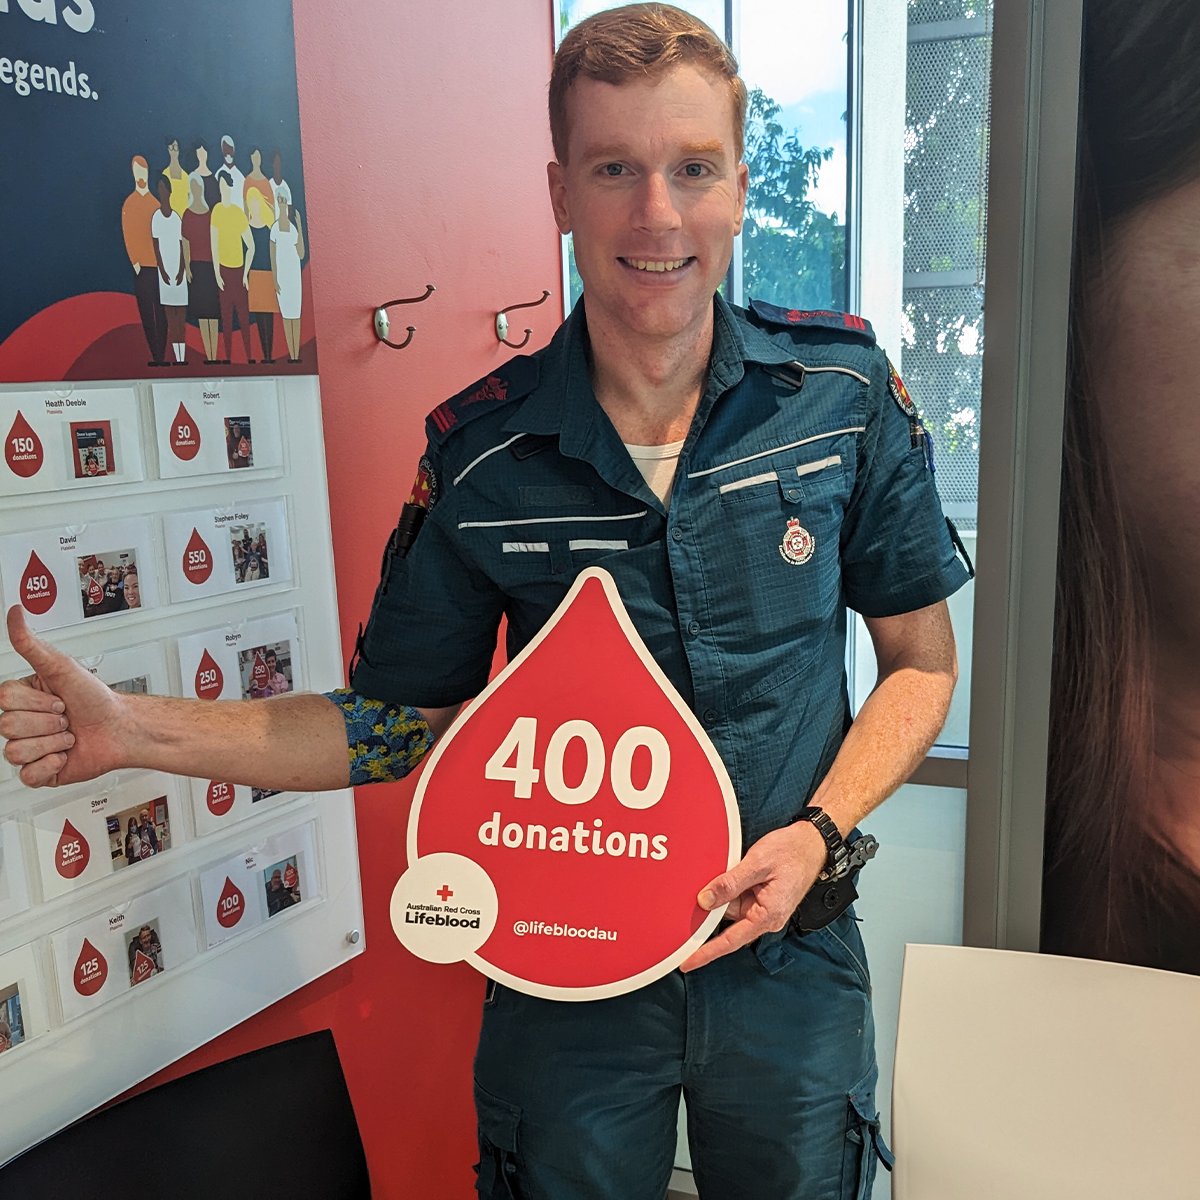 Ryan began donating blood 21 years ago and recently made his 400th donation at 37, making him the youngest donor to hit this milestone! As well as being a regular donor, he's also impacting lives as a paramedic for @qldambulance and volunteers for @qld_fes. #lifebloodau